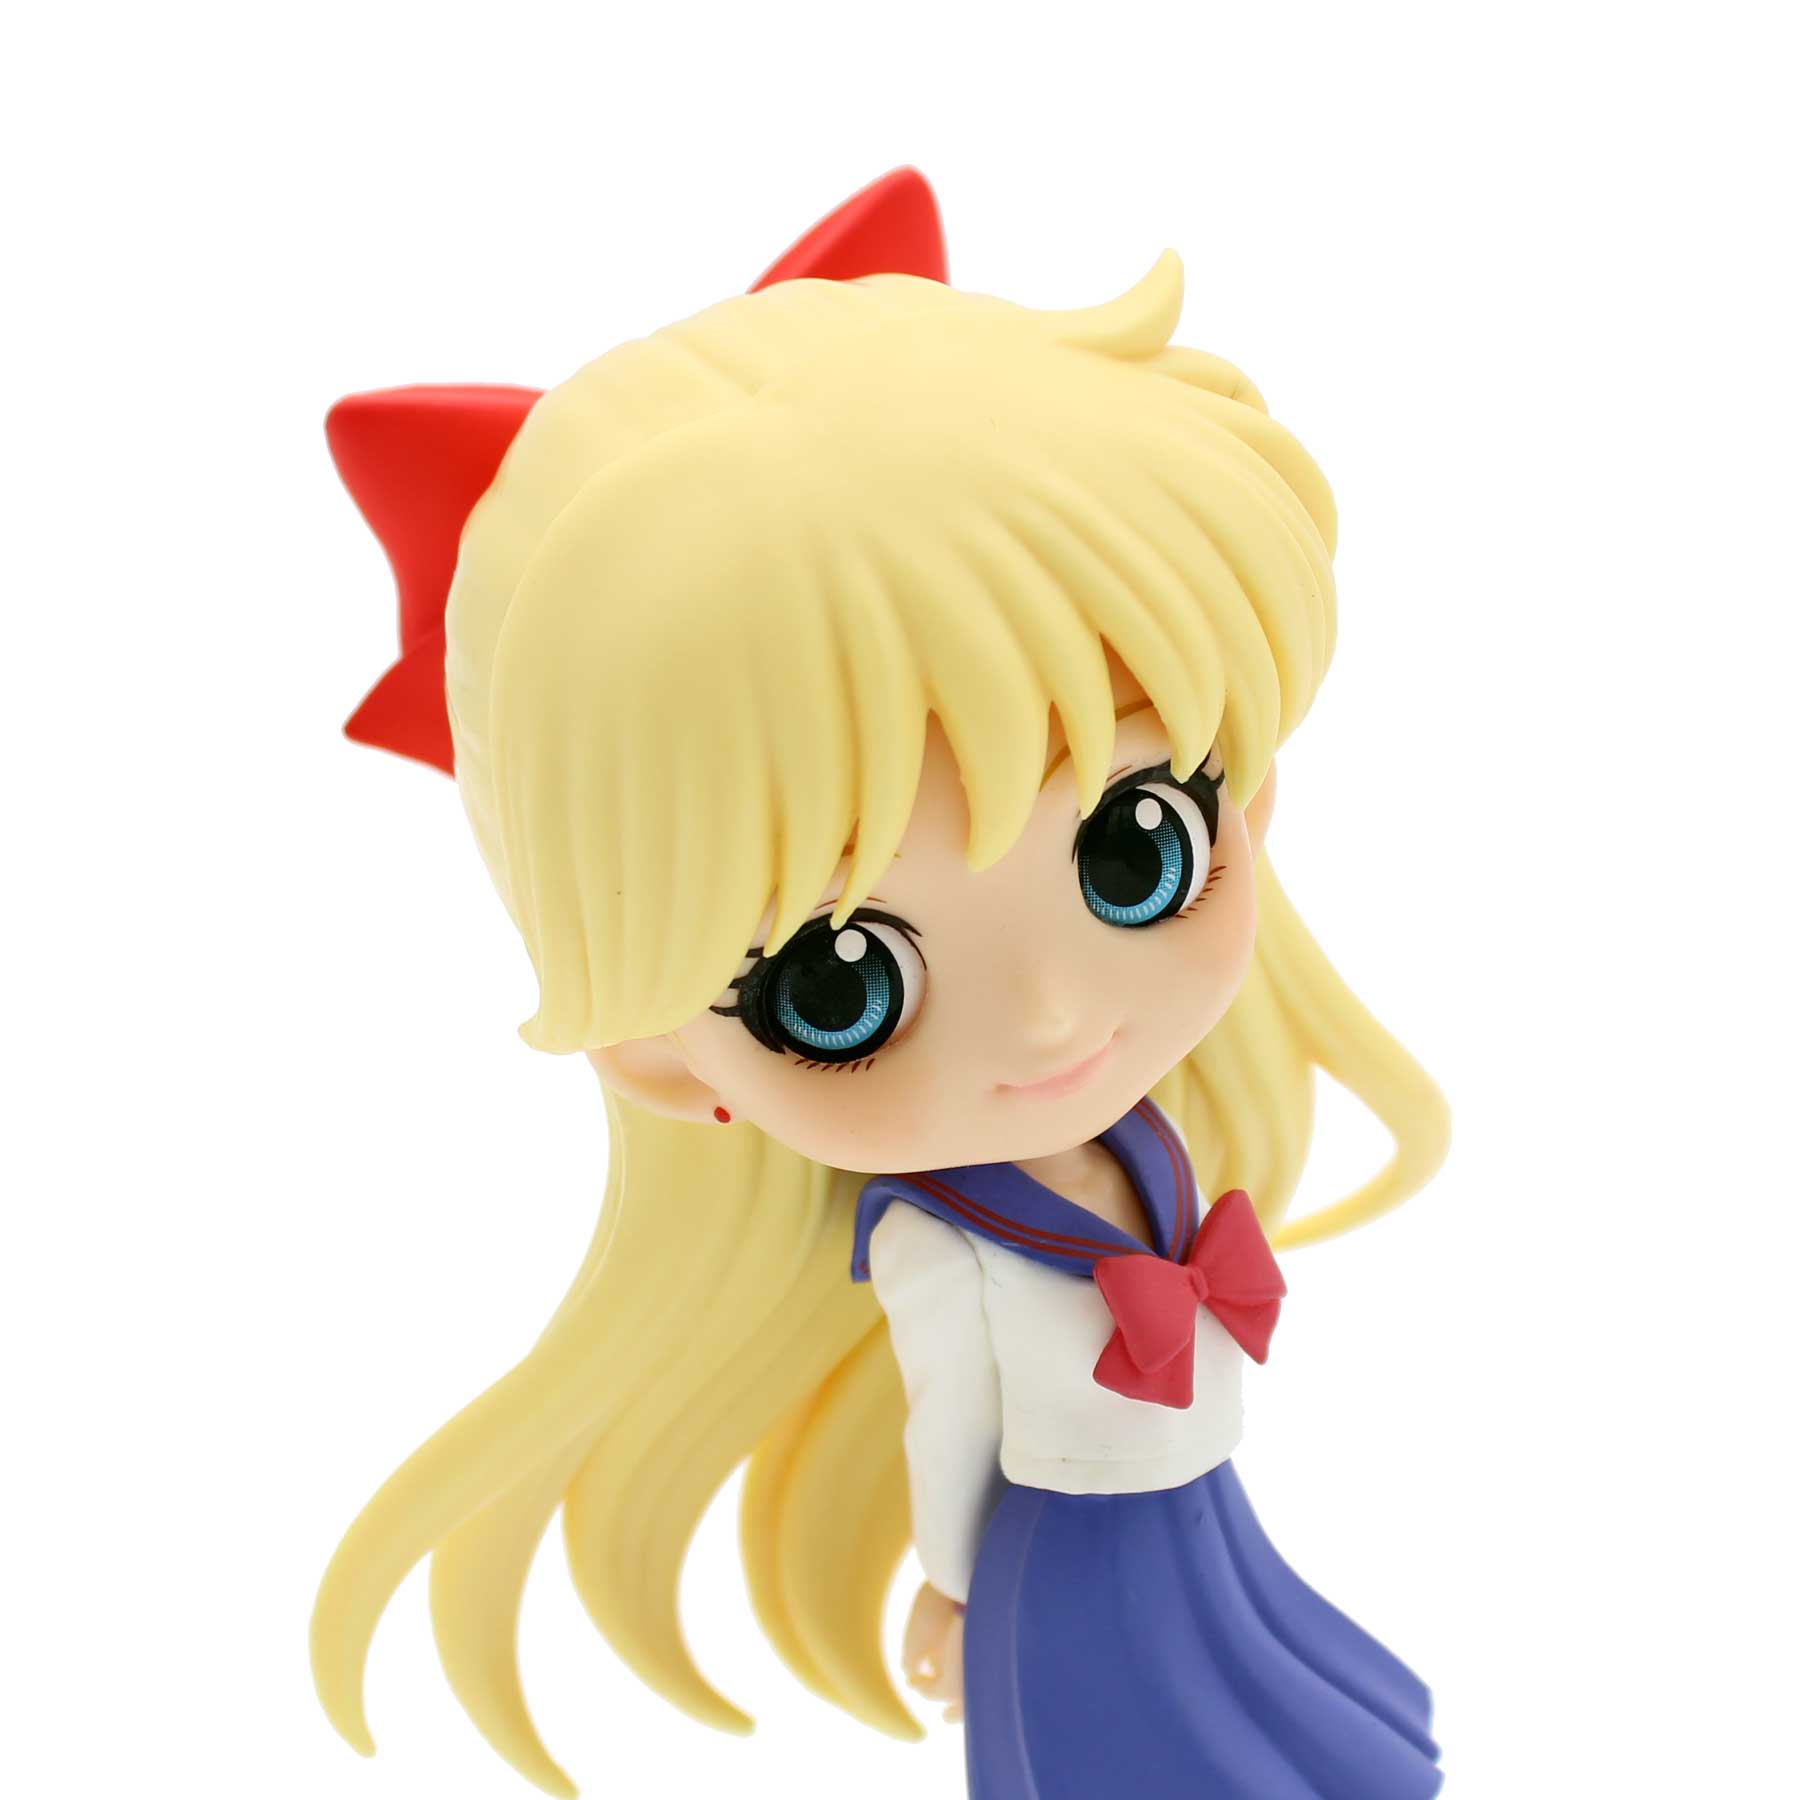 Chibi Styles Anime Collectible Figures Statues